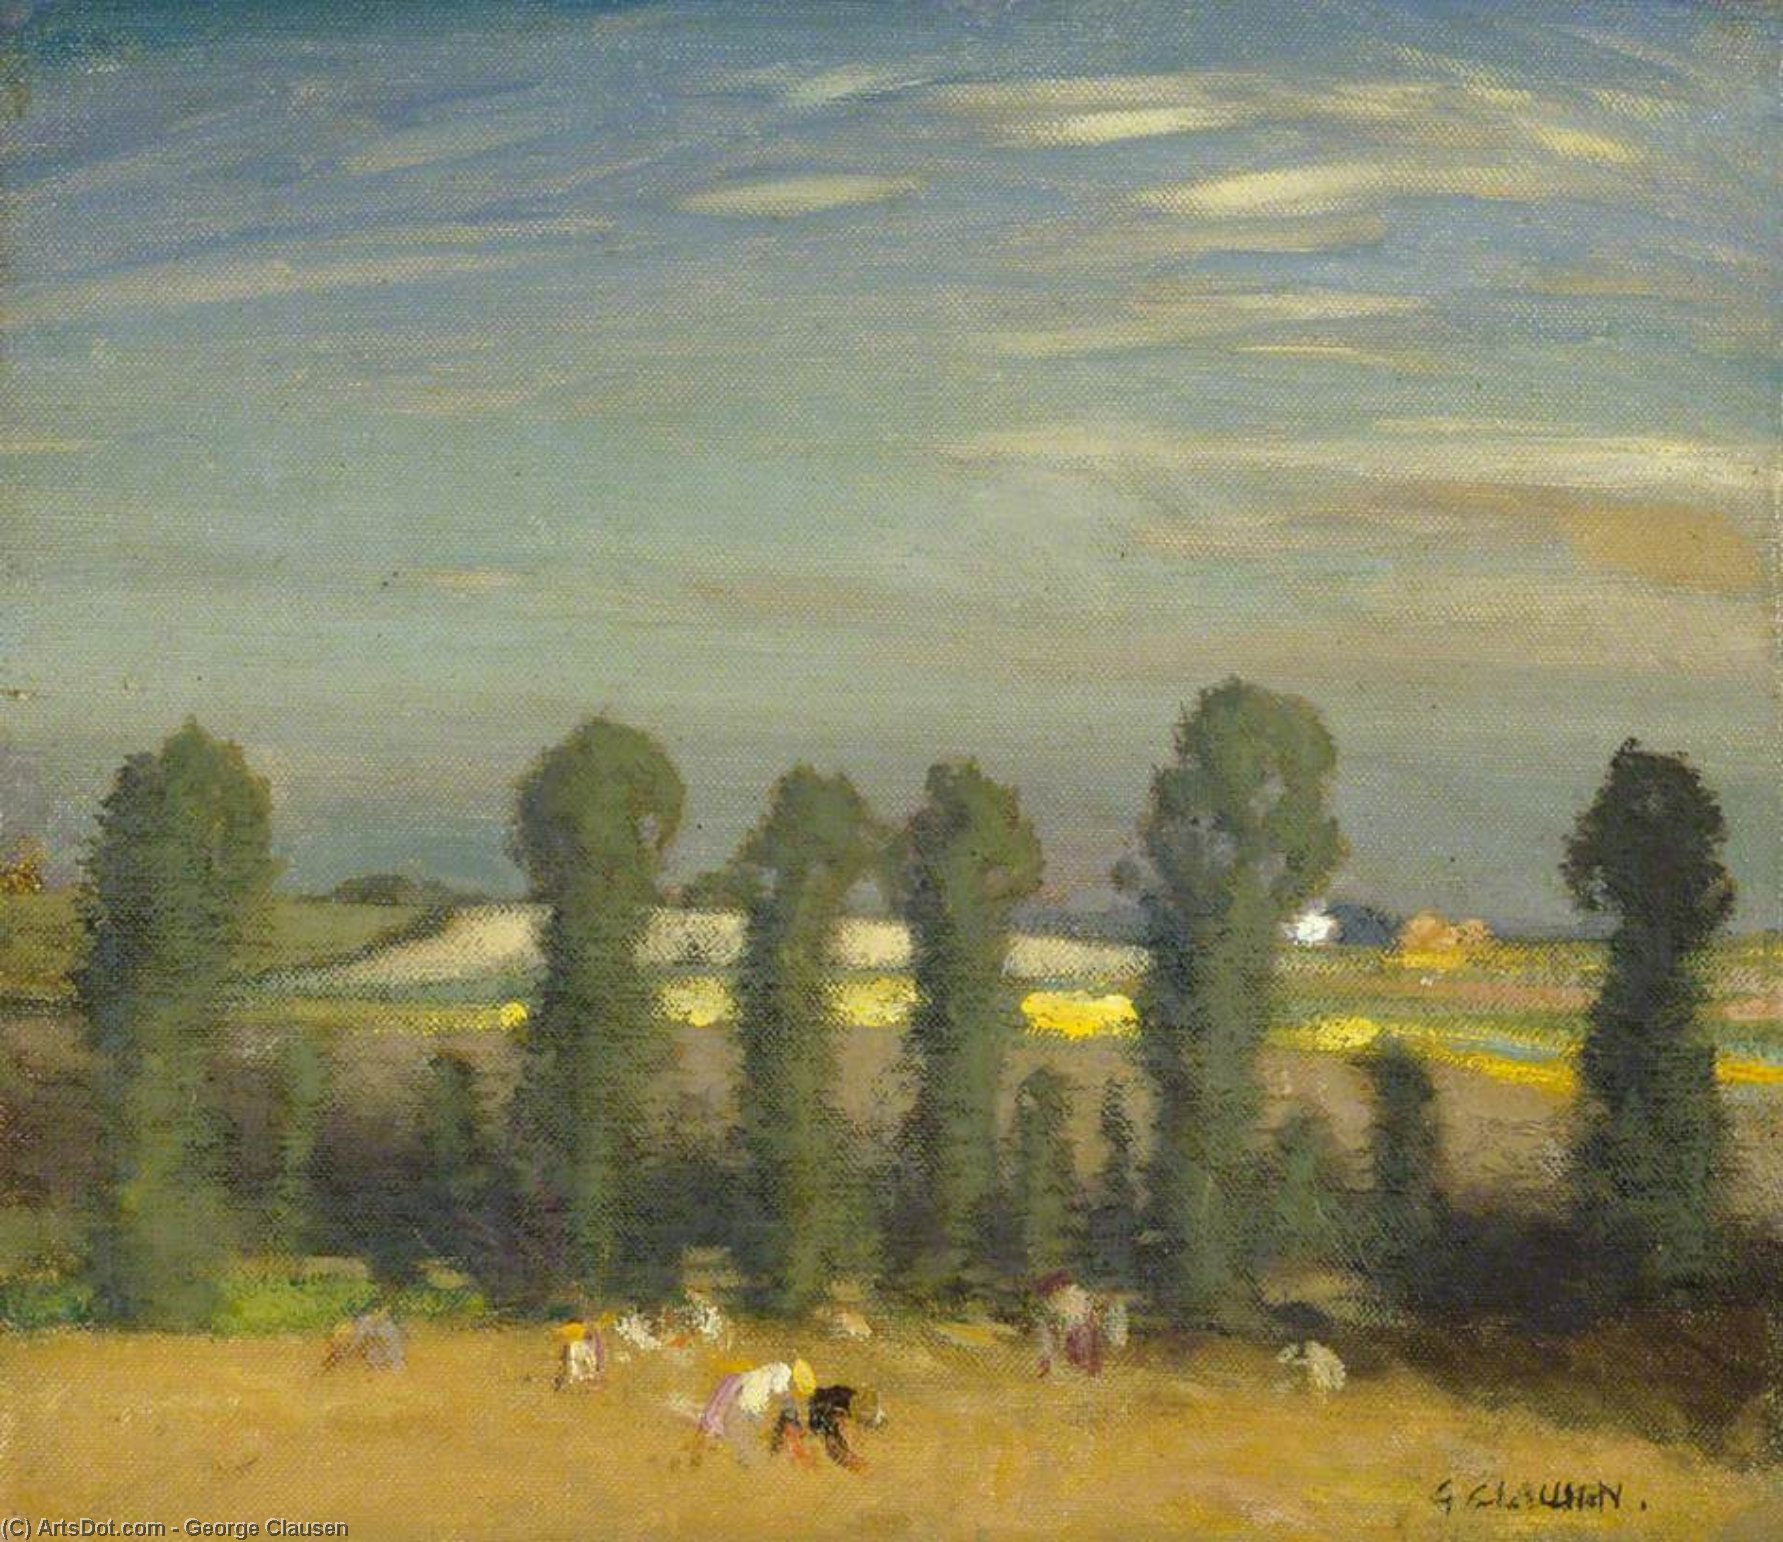 Buy Museum Art Reproductions Landscape with Hayfield and Poplars by George Clausen | ArtsDot.com